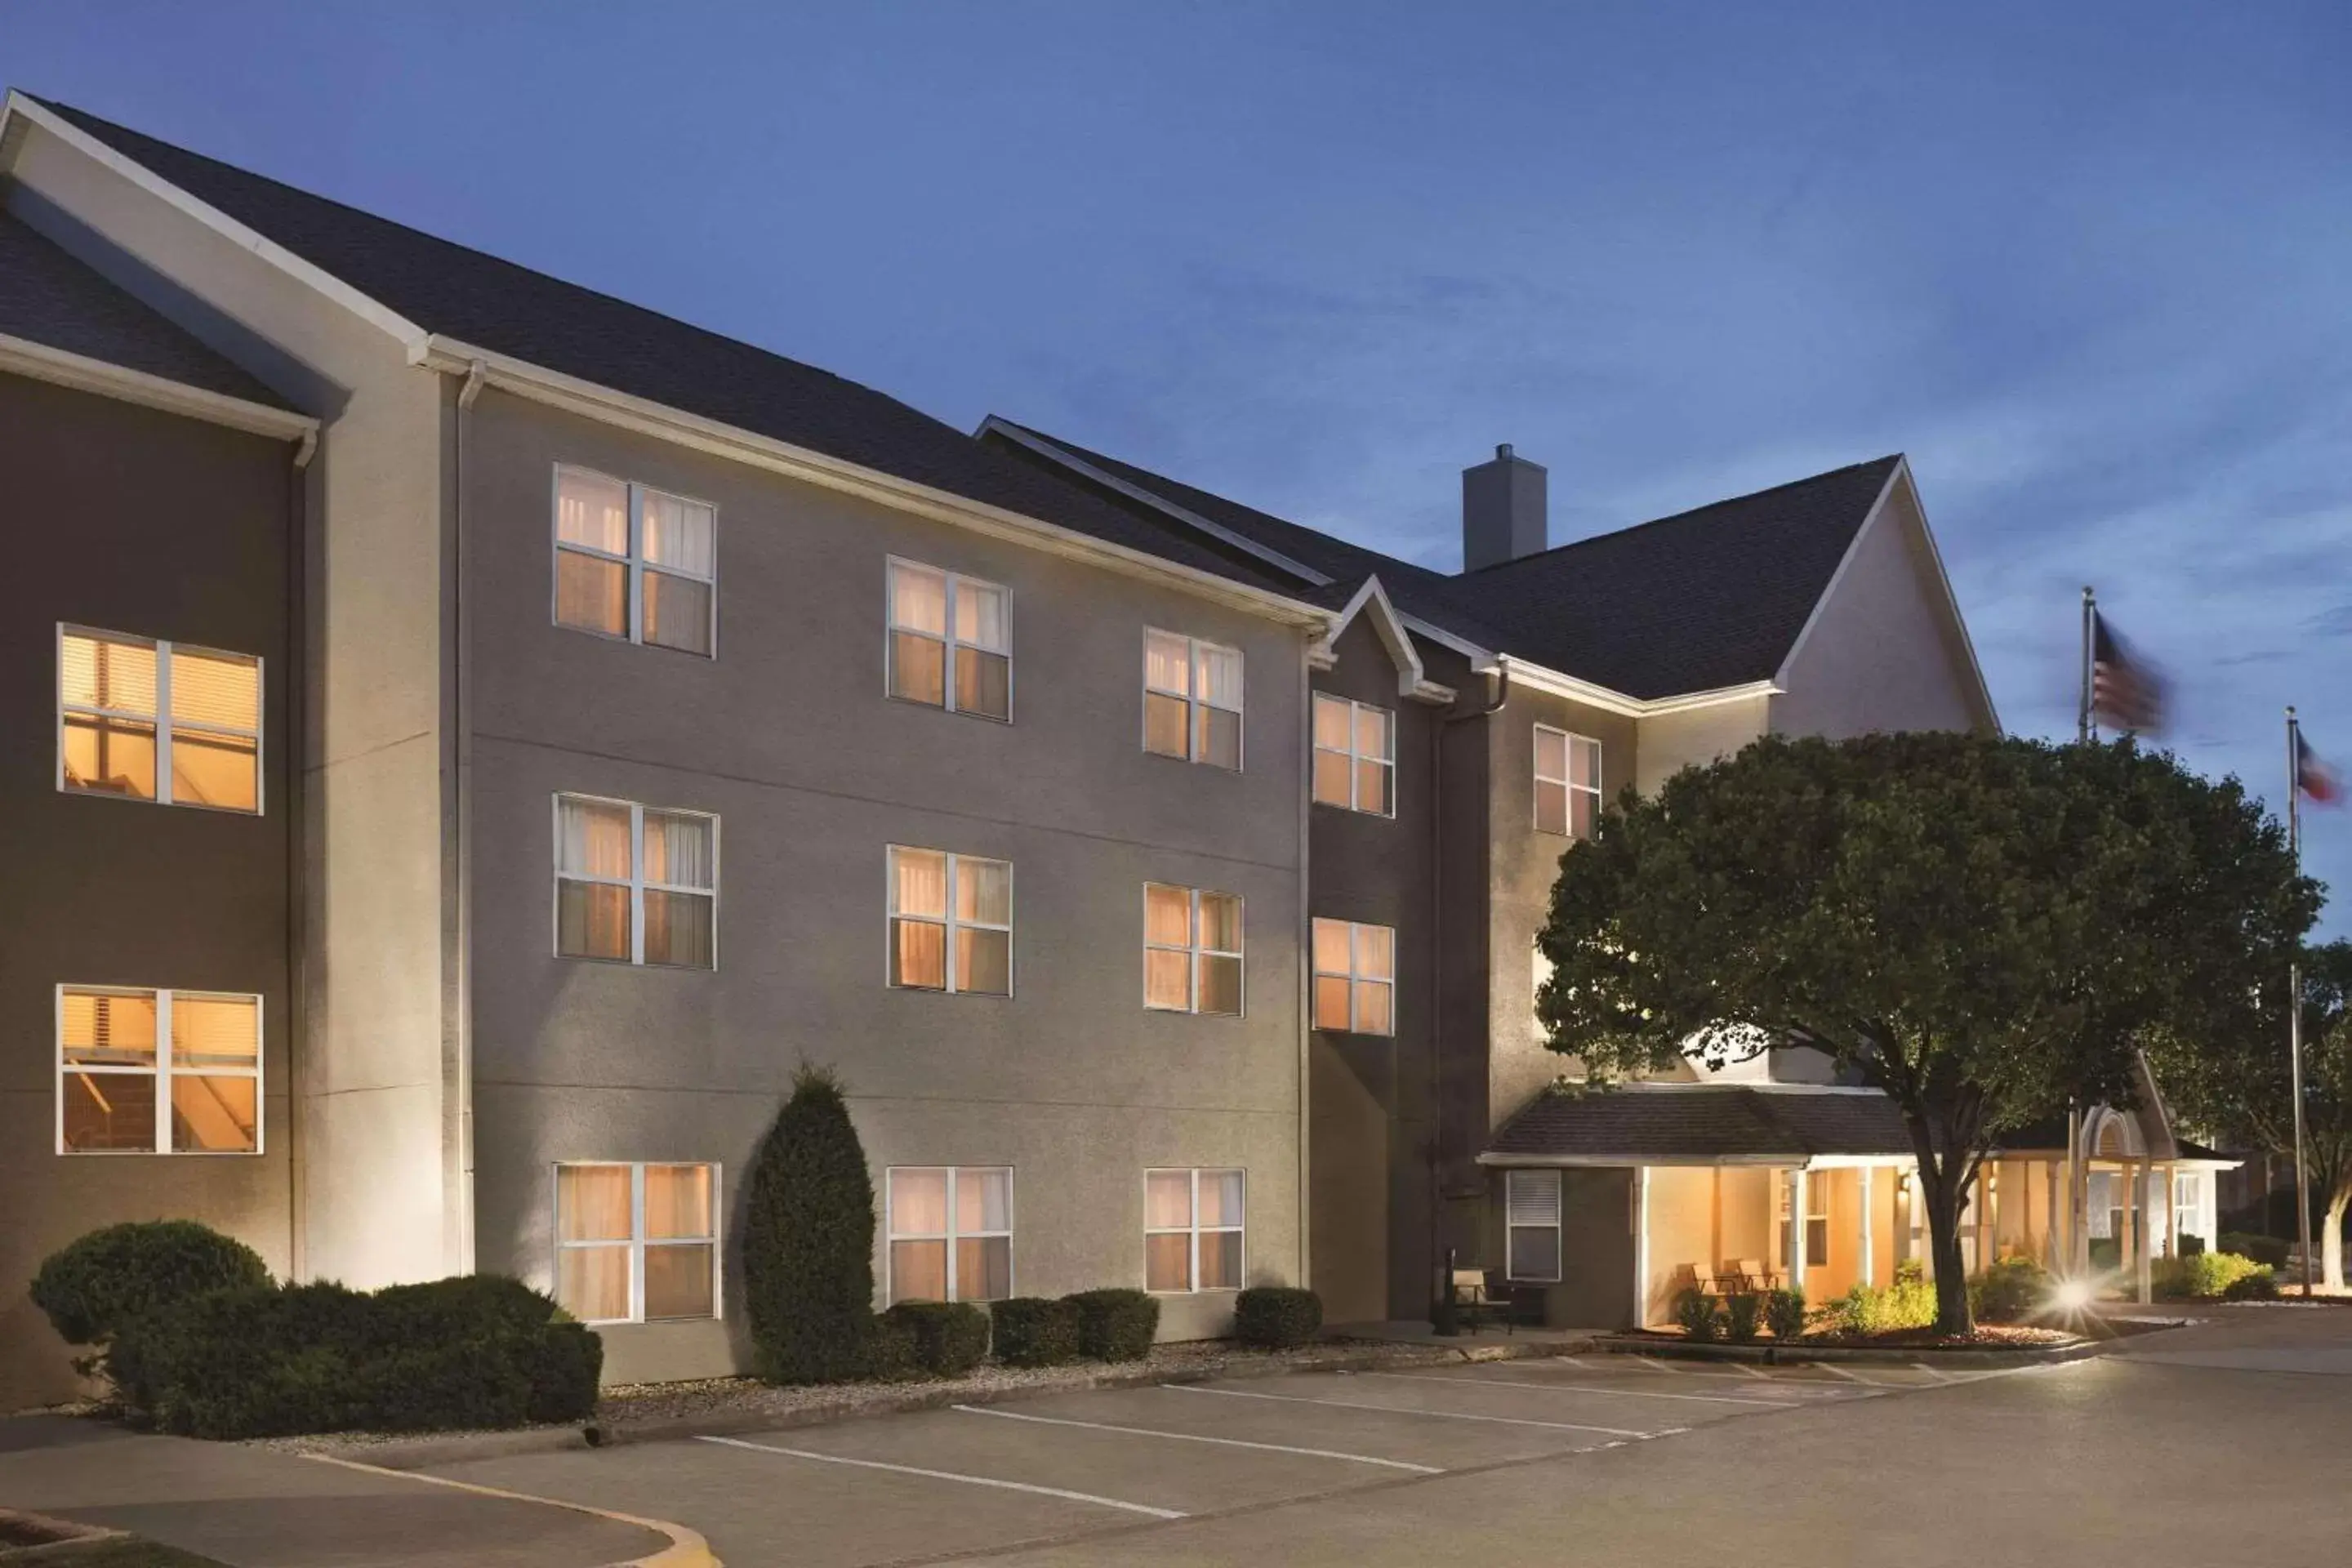 Property Building in Country Inn & Suites by Radisson, Lewisville, TX